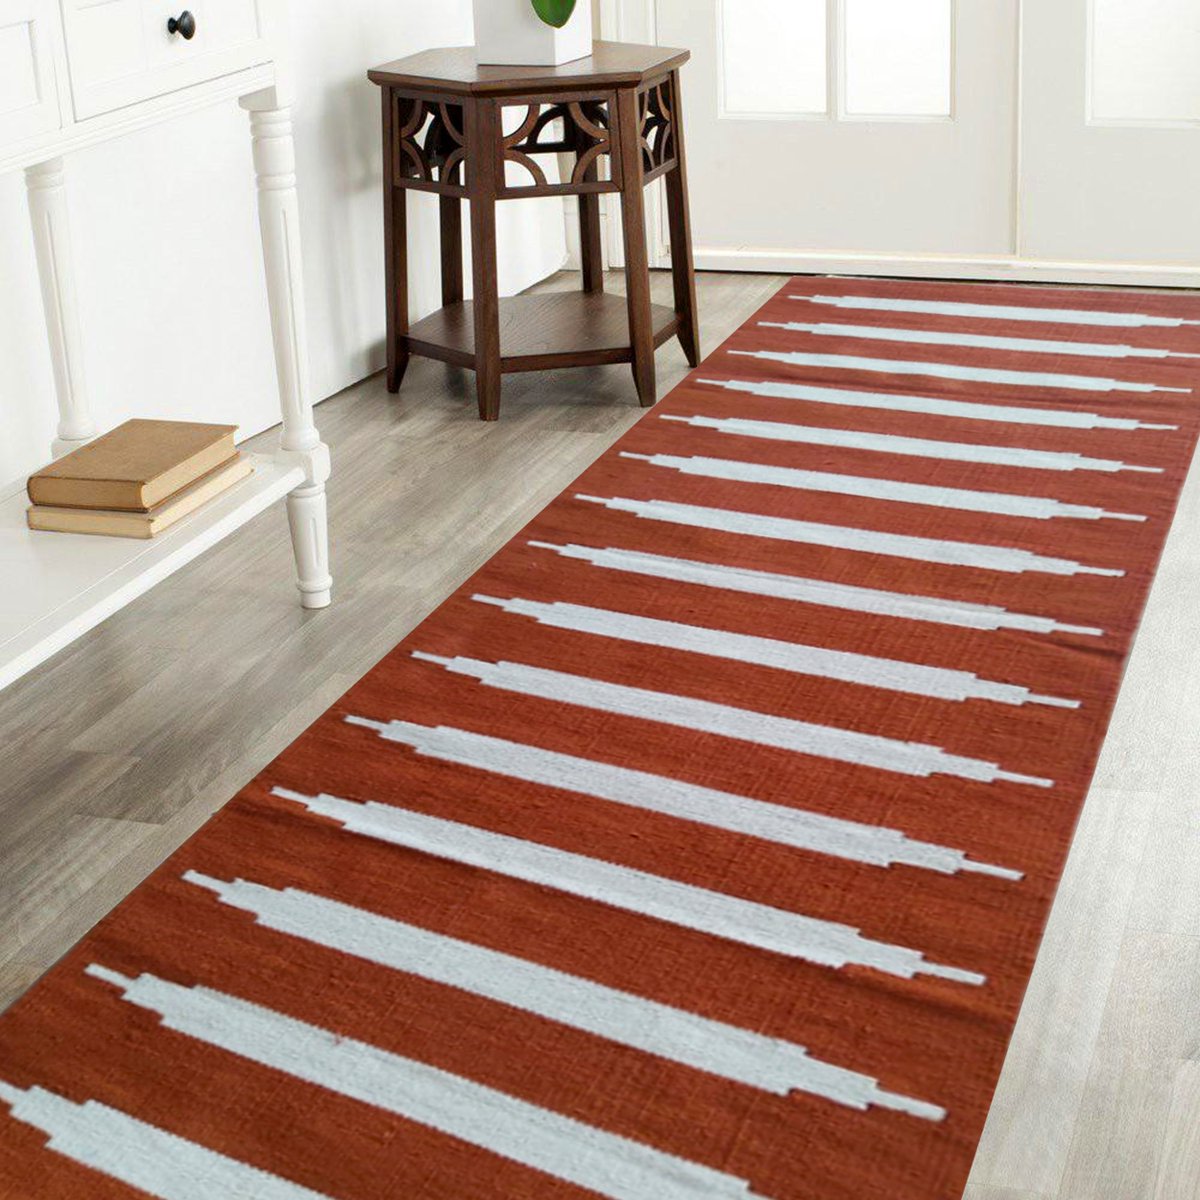 Thanks for the great review Kitty C. ★★★★★! etsy.me/418iSzA #etsy #brown #wedding #rectangle #white #abstract #bedroom #countryfarmhouse #runner #cottonrug #arearug #kitchenrug #bathroomrug #runnerrug #kitchenrunner #stairecaserug #bedsiderug